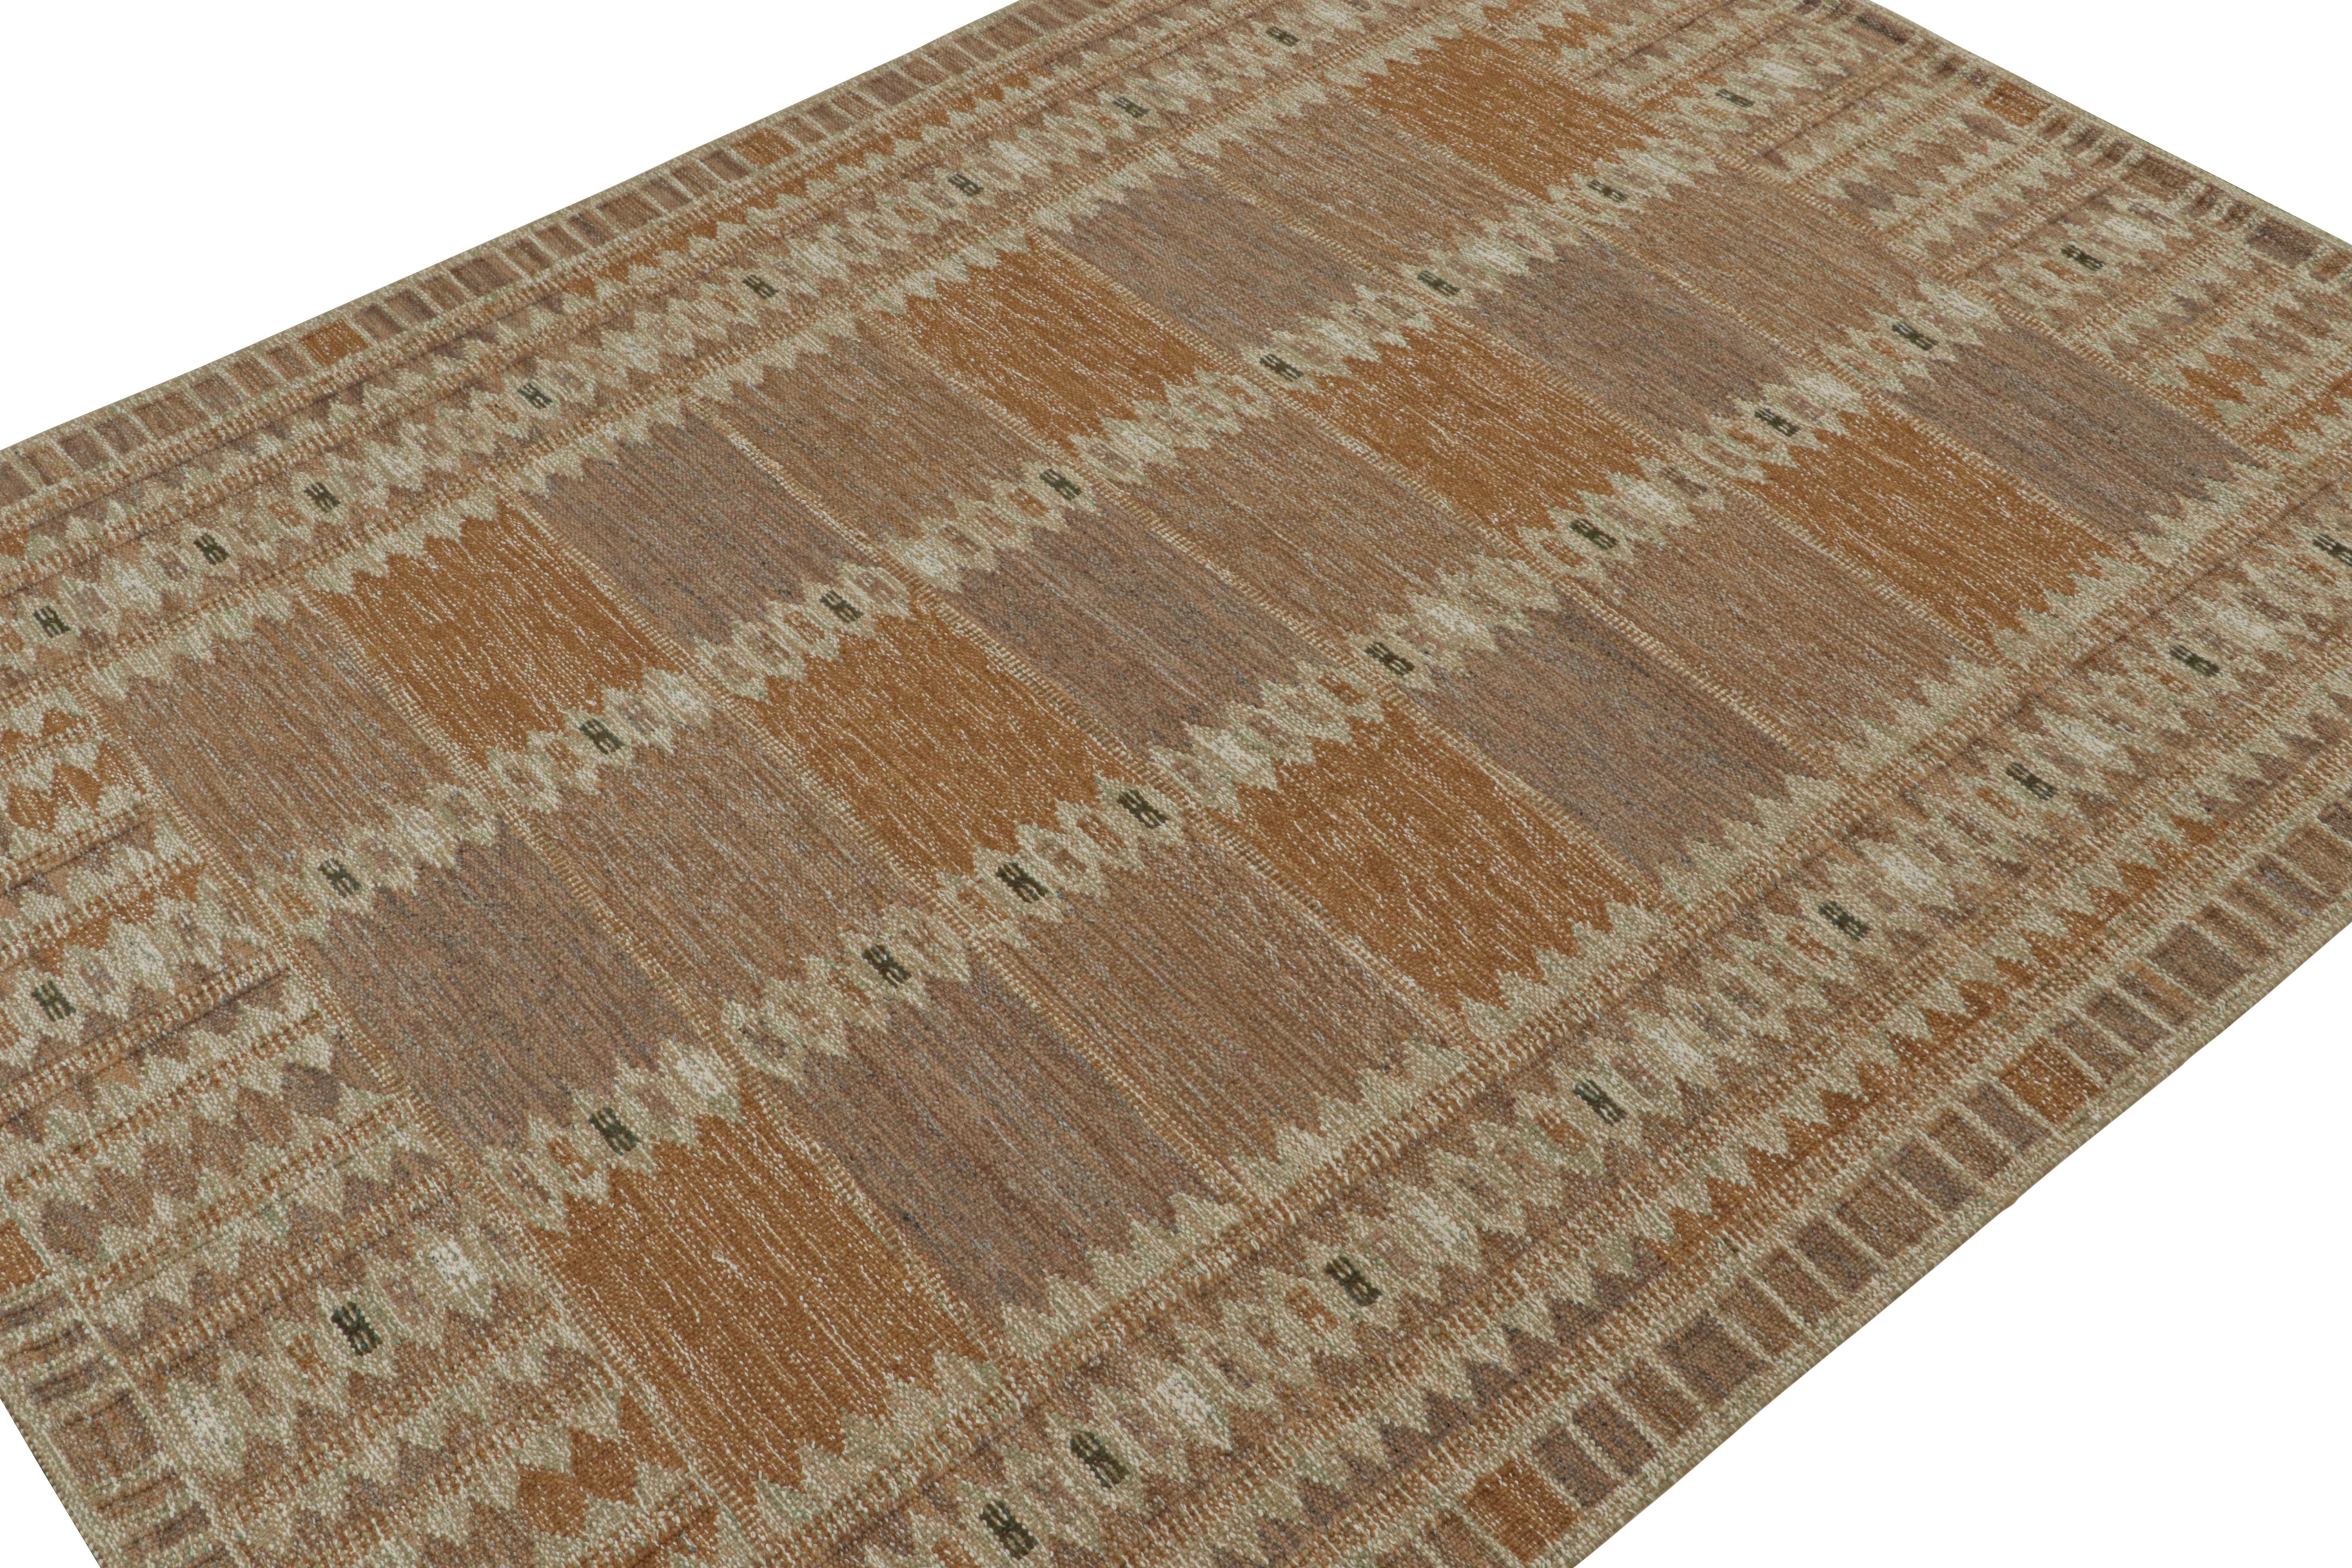 This 9x12 Swedish style flatweave is from the award-winning Scandinavian rug collection by Rug & Kilim. Handwoven in wool, cotton & undyed natural yarns, its design reflects a contemporary take on mid-century Rollakans and Swedish Deco style.

On